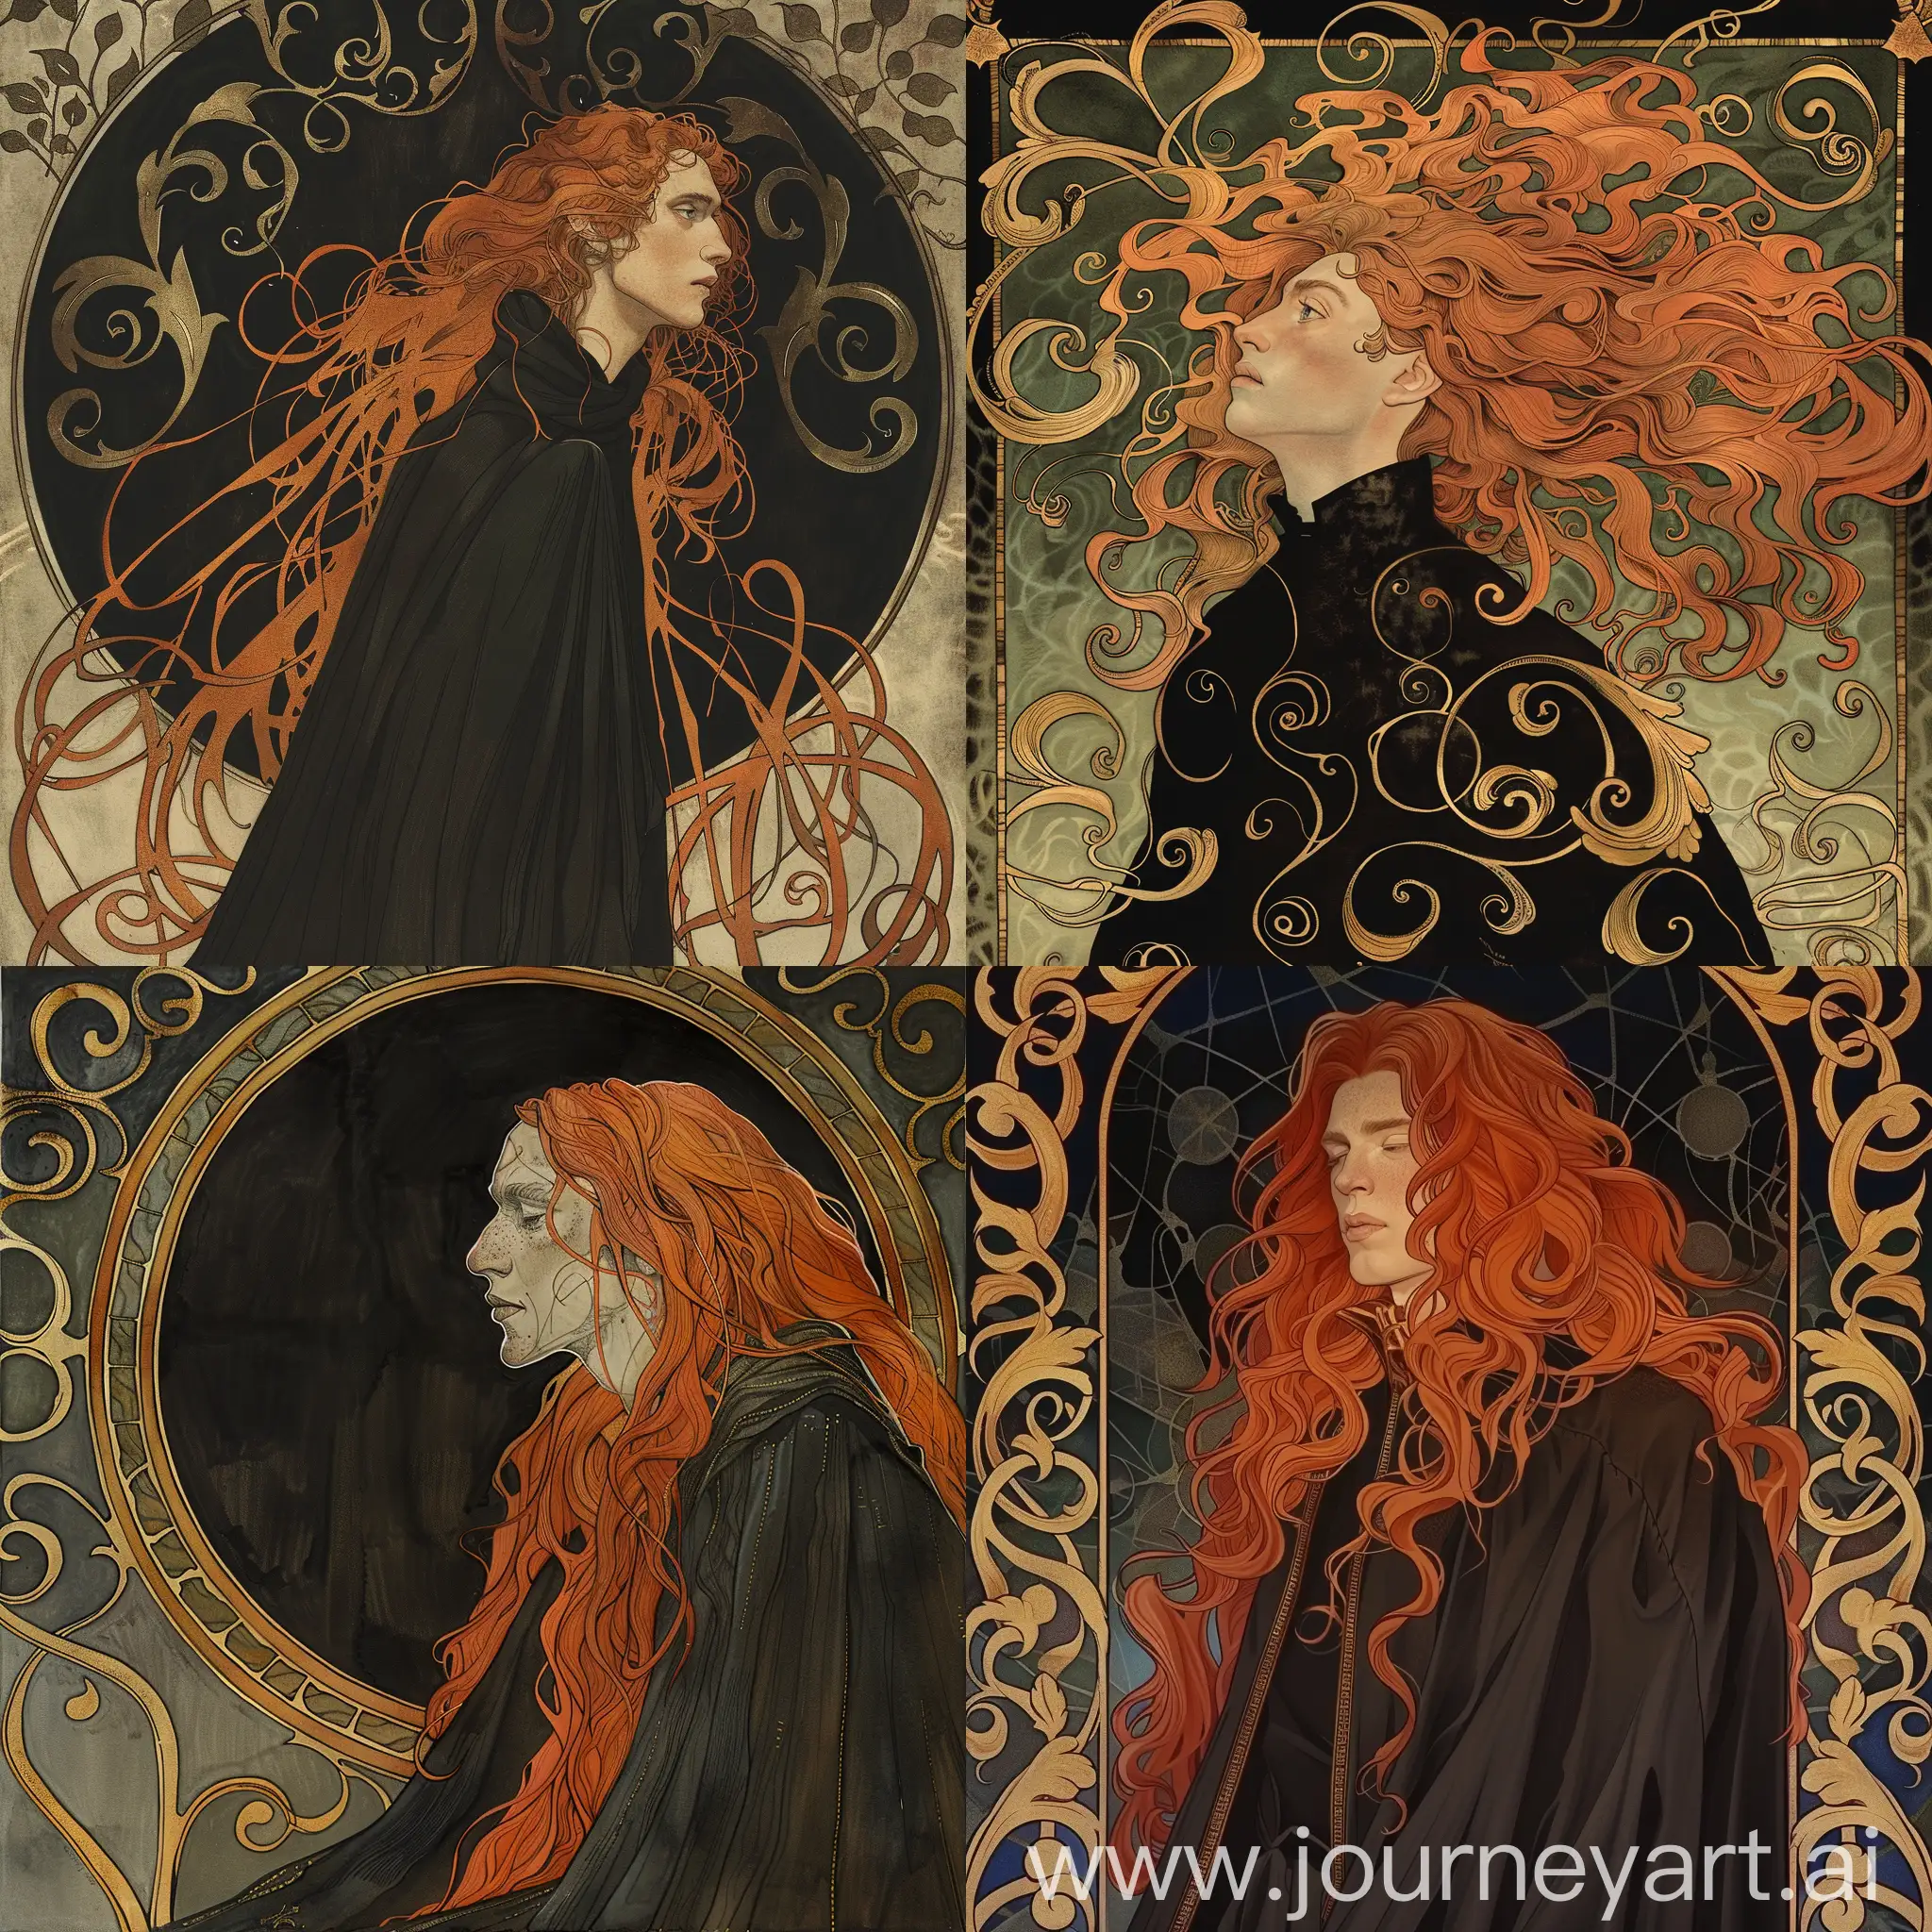 Man with long red hair, in the dark mantle, art nouveau, illustration